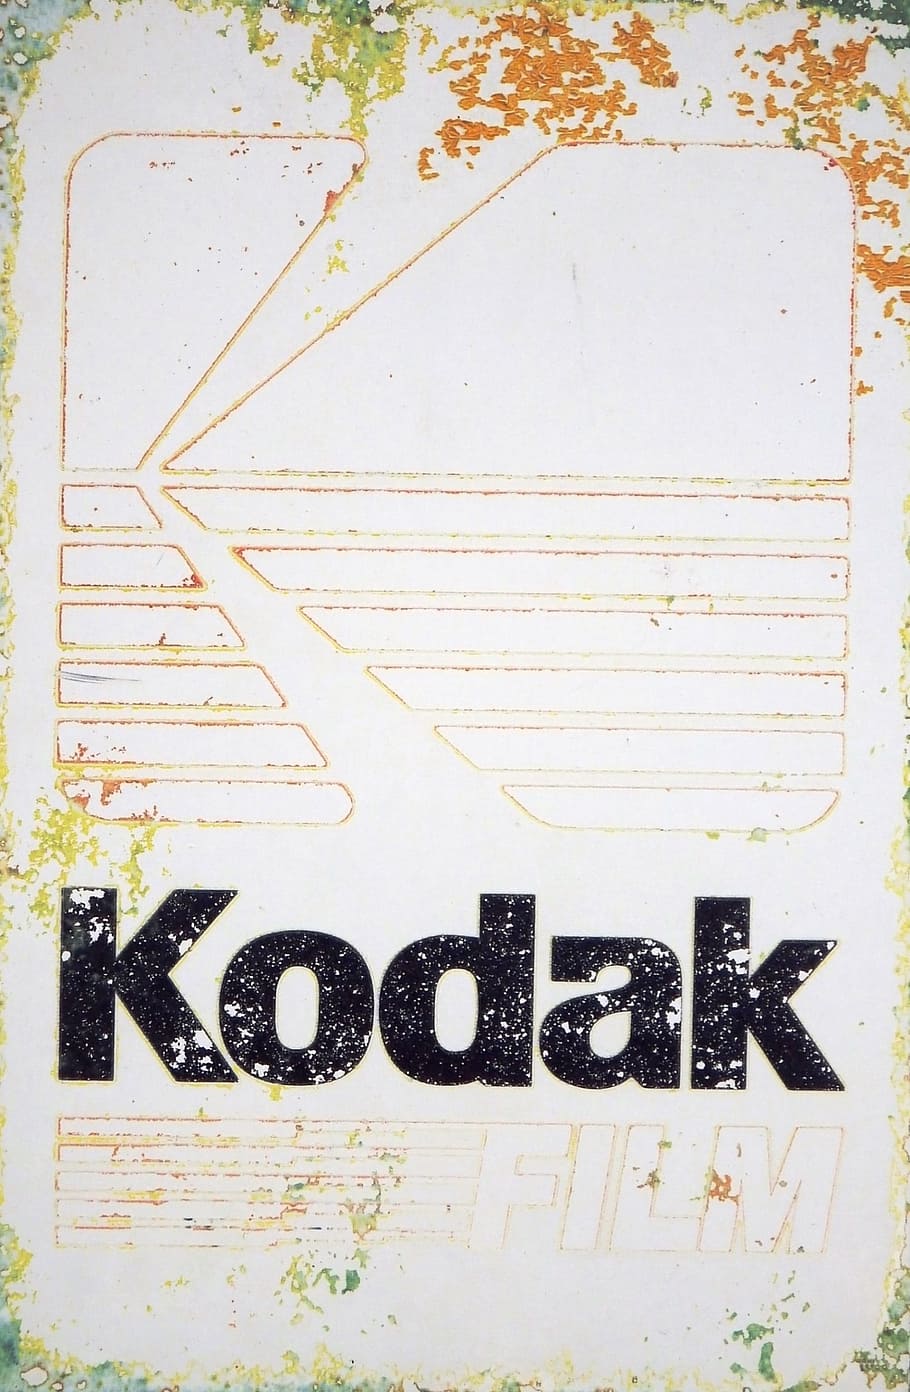 Vintage aged advertising sign board for the Kodak camera brand - Editorial Use Only, HD wallpaper